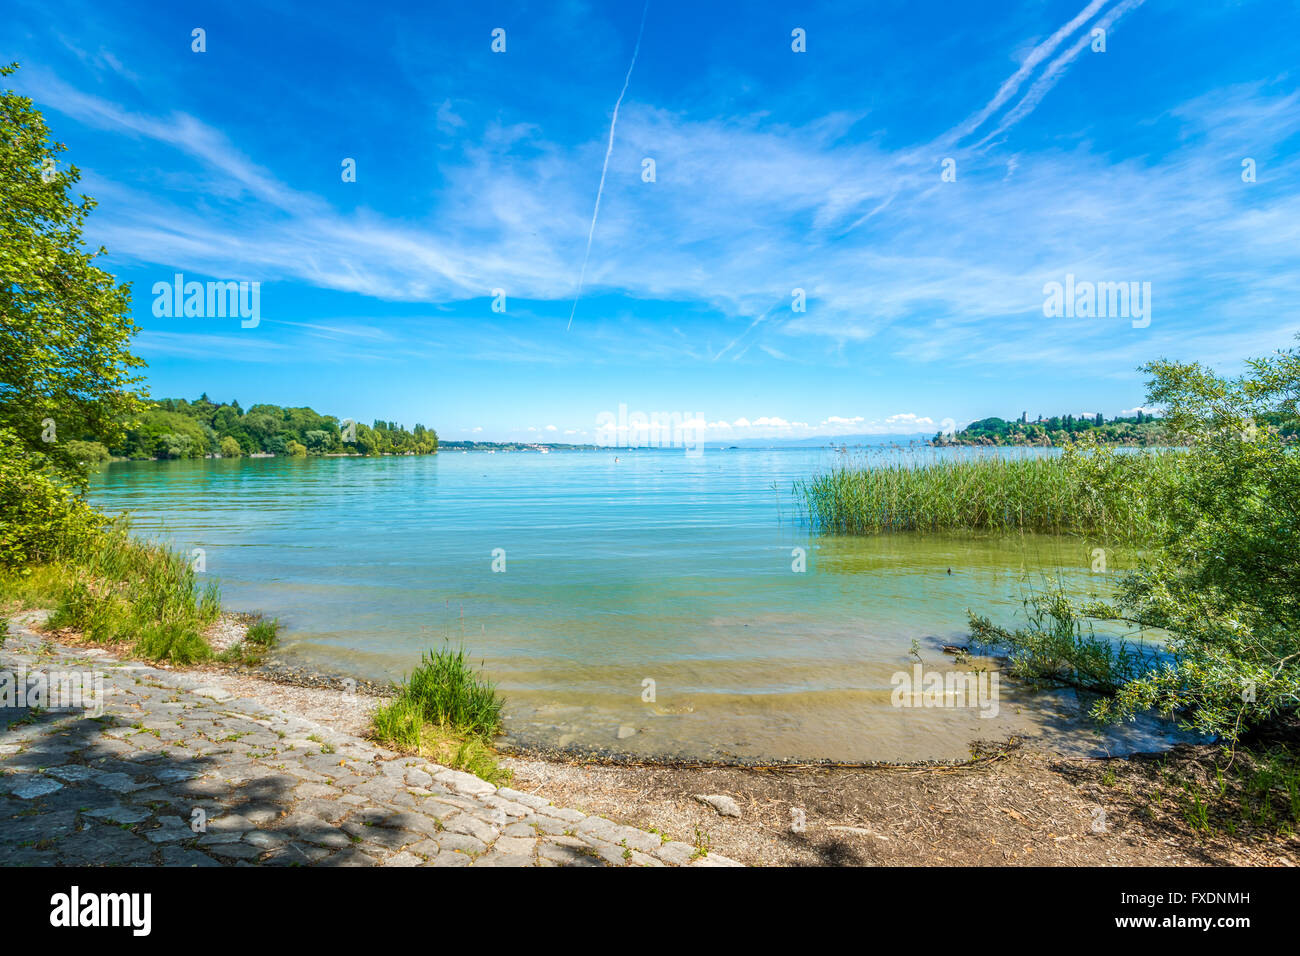 Bodensee, Lake Constance, Landscape, Stock Photo